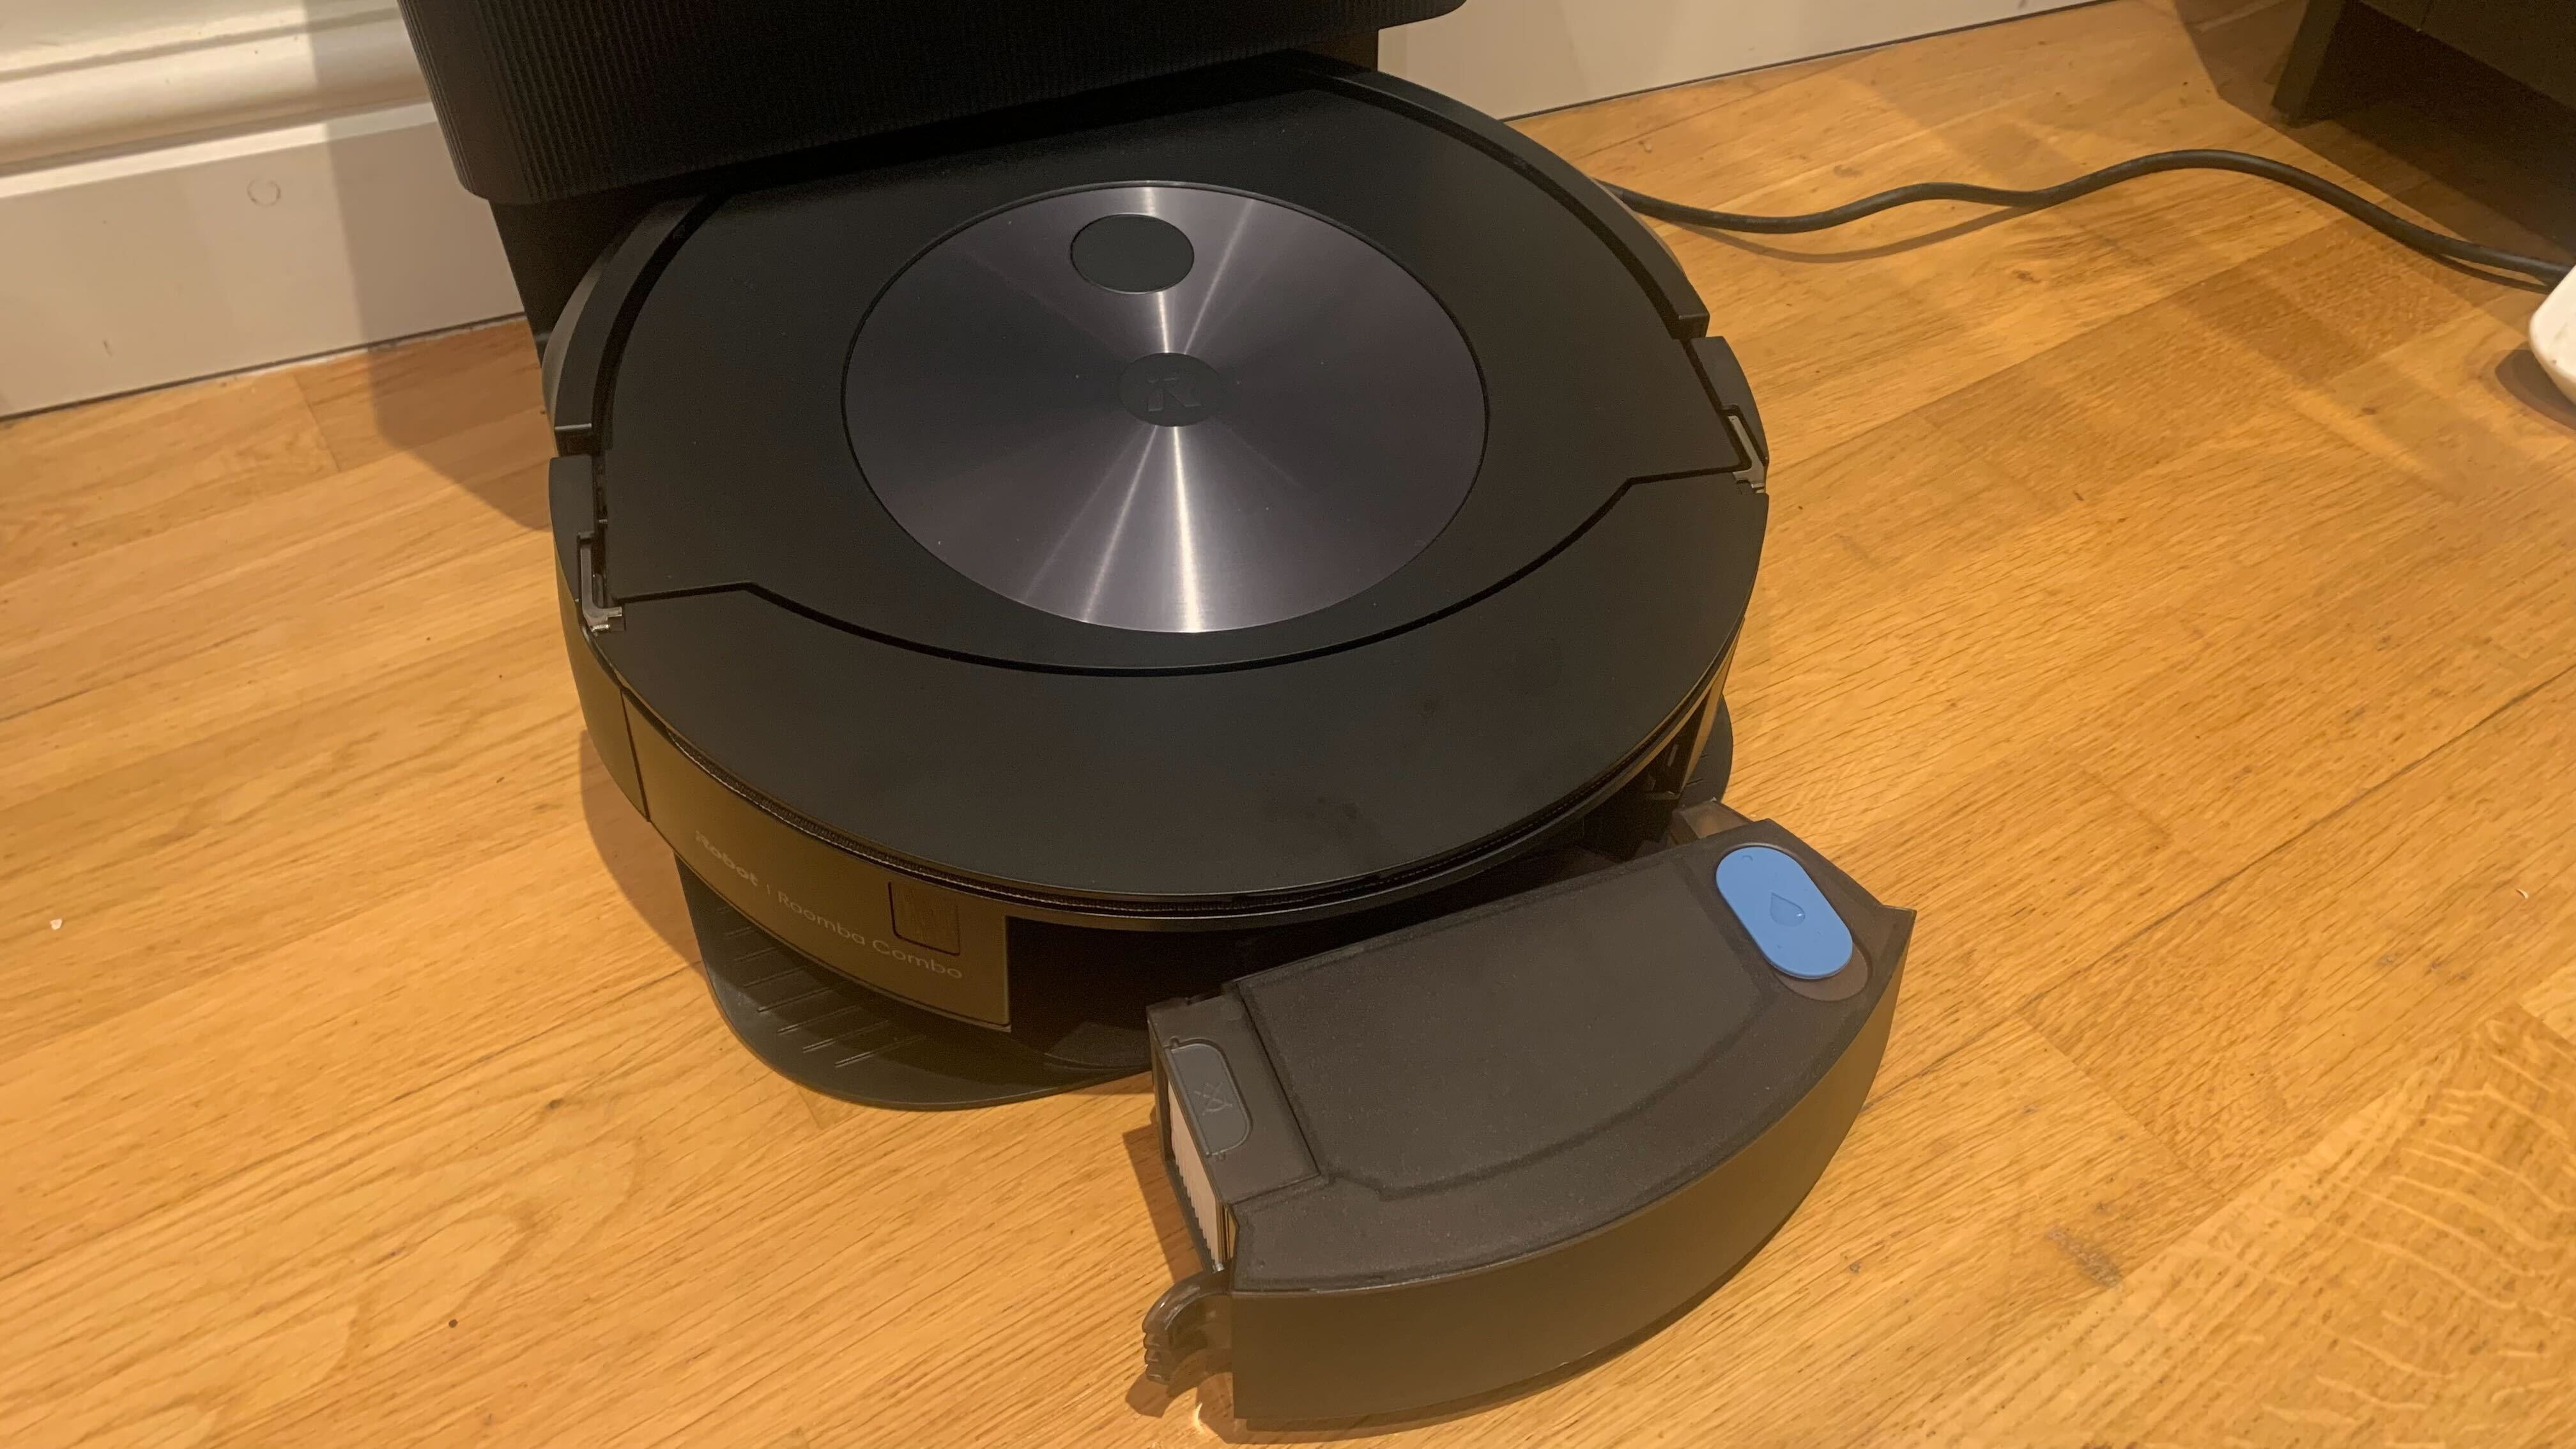 The iRobot Roomba Combo j7+ with its dustbin removed